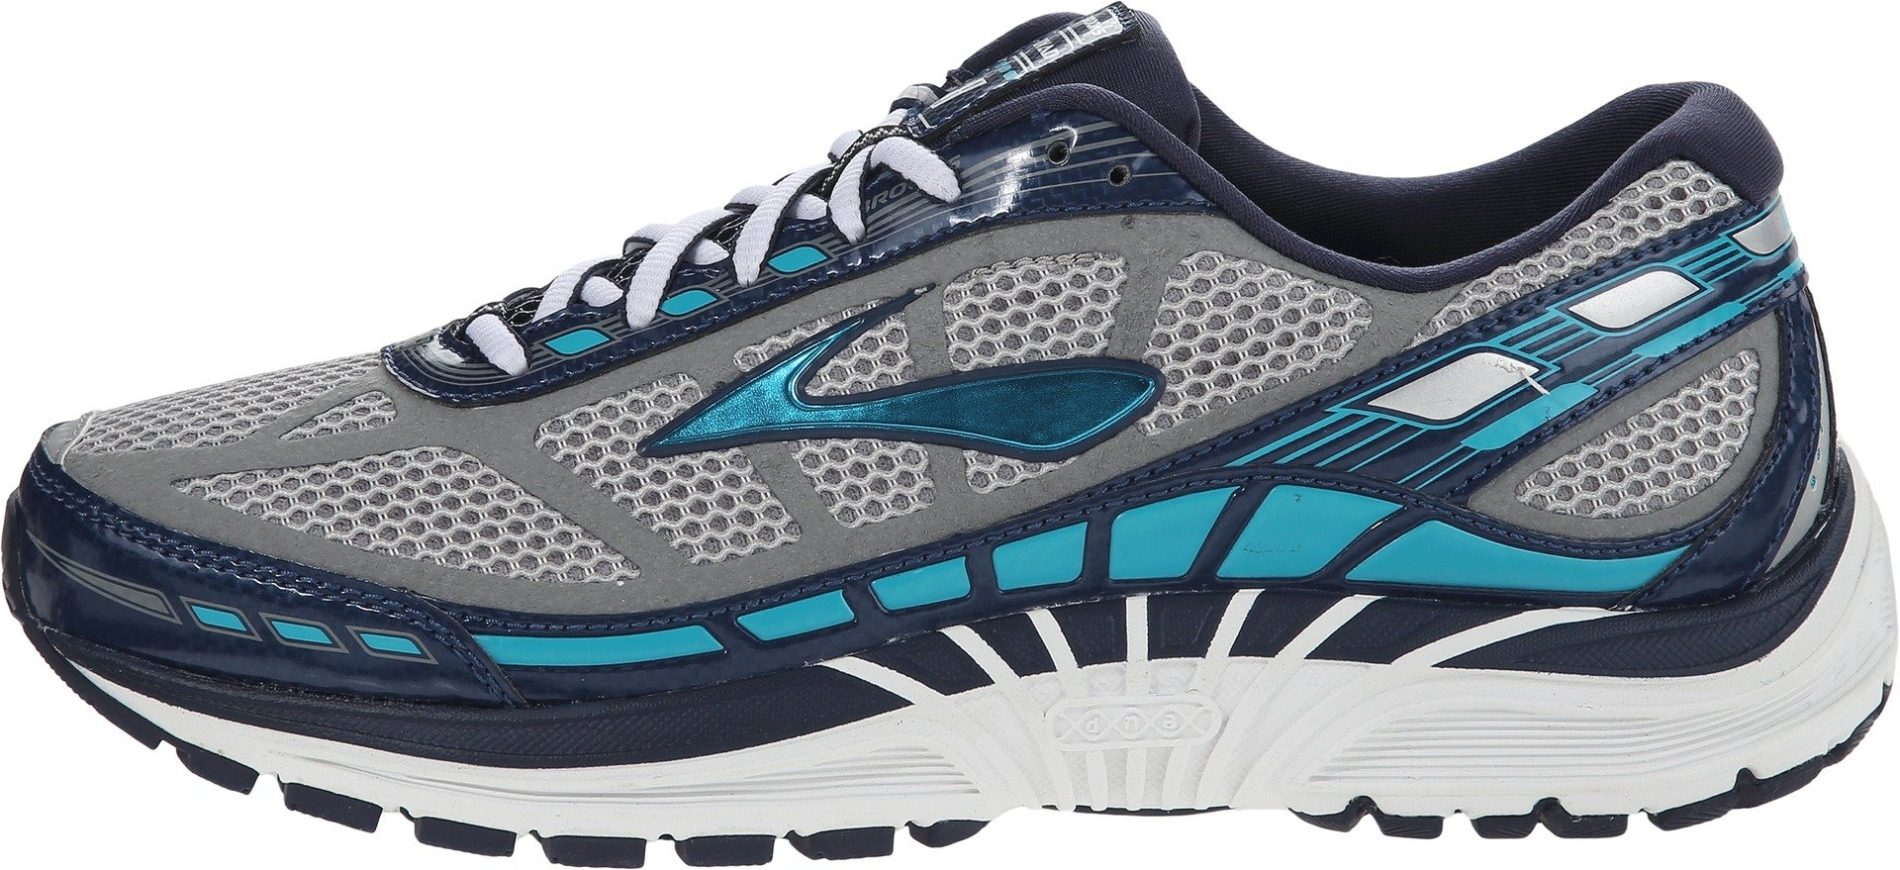 brooks dyad review